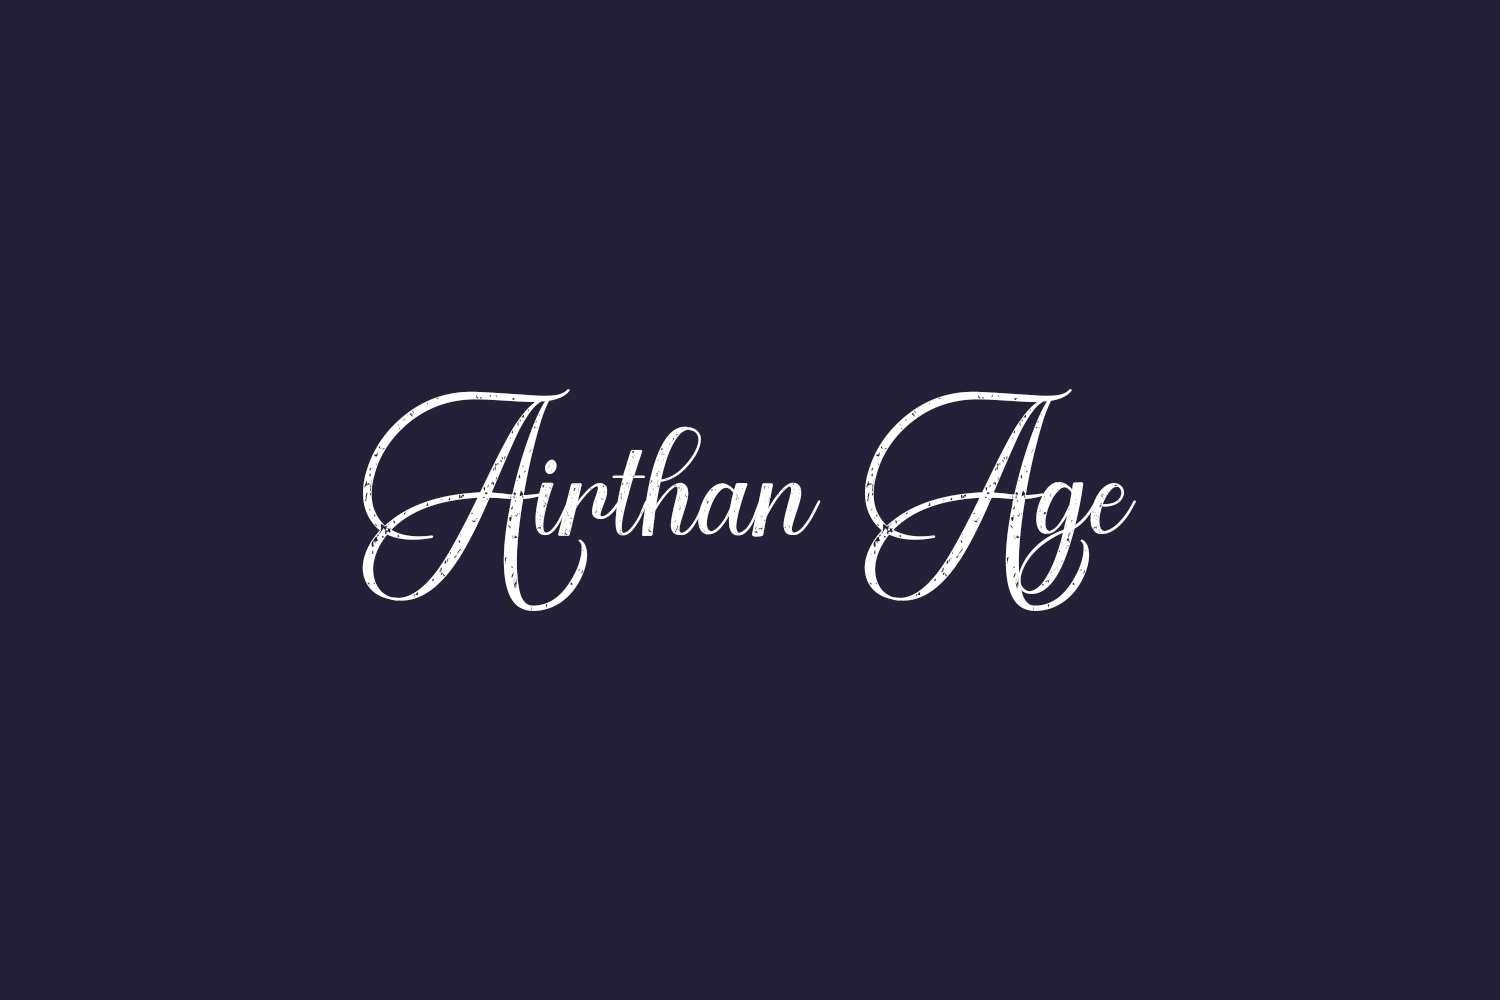 Airthan Age Free Font